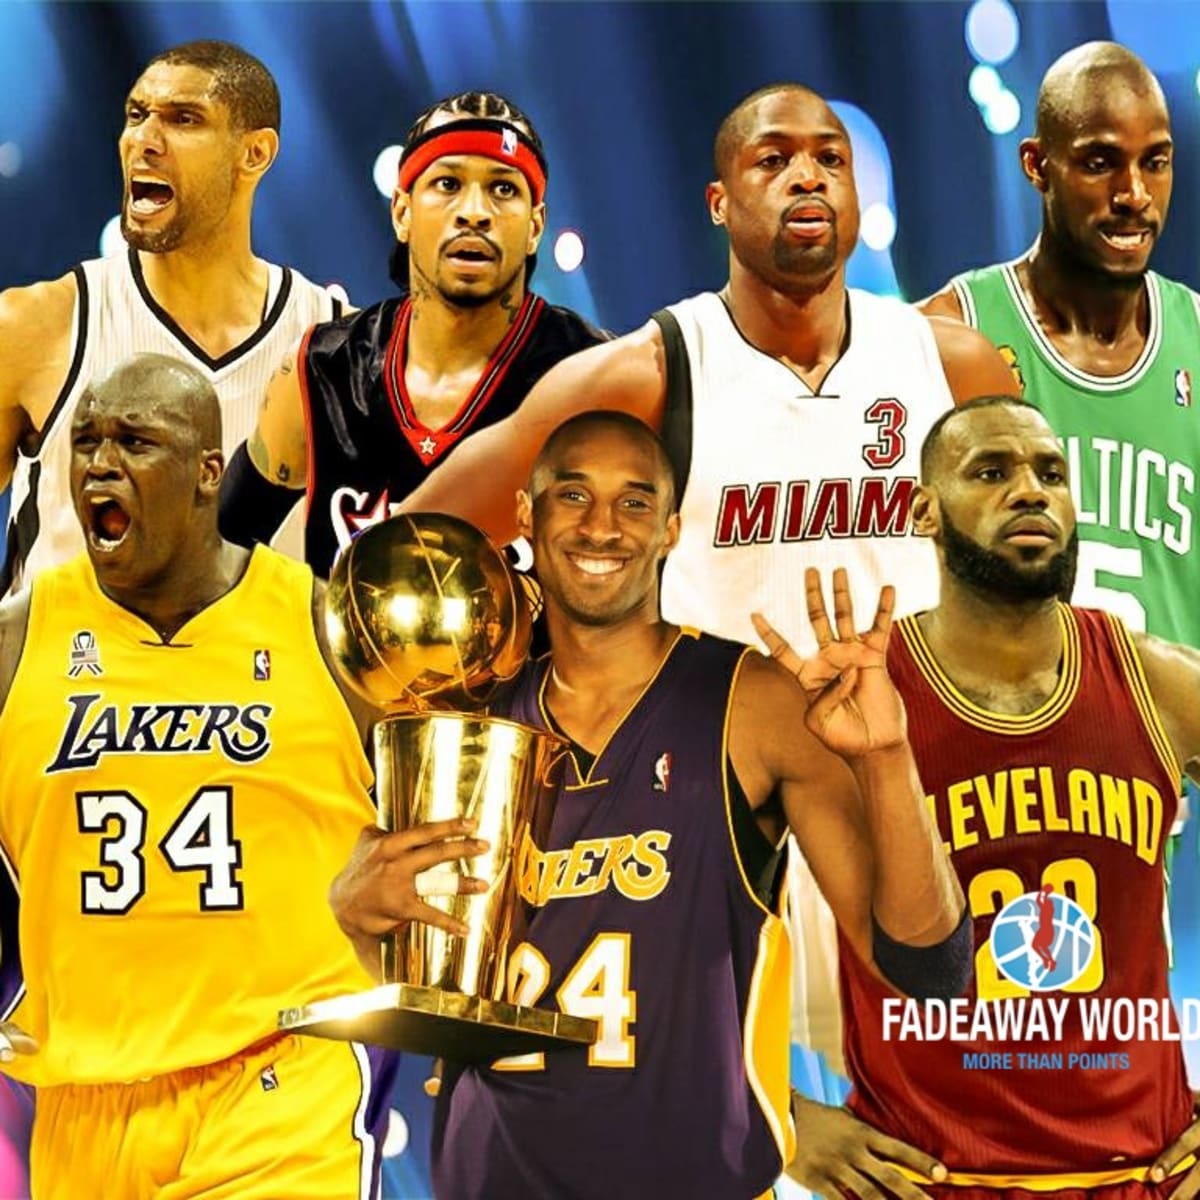 The Most Underrated NBA Players Of The Early 2000s